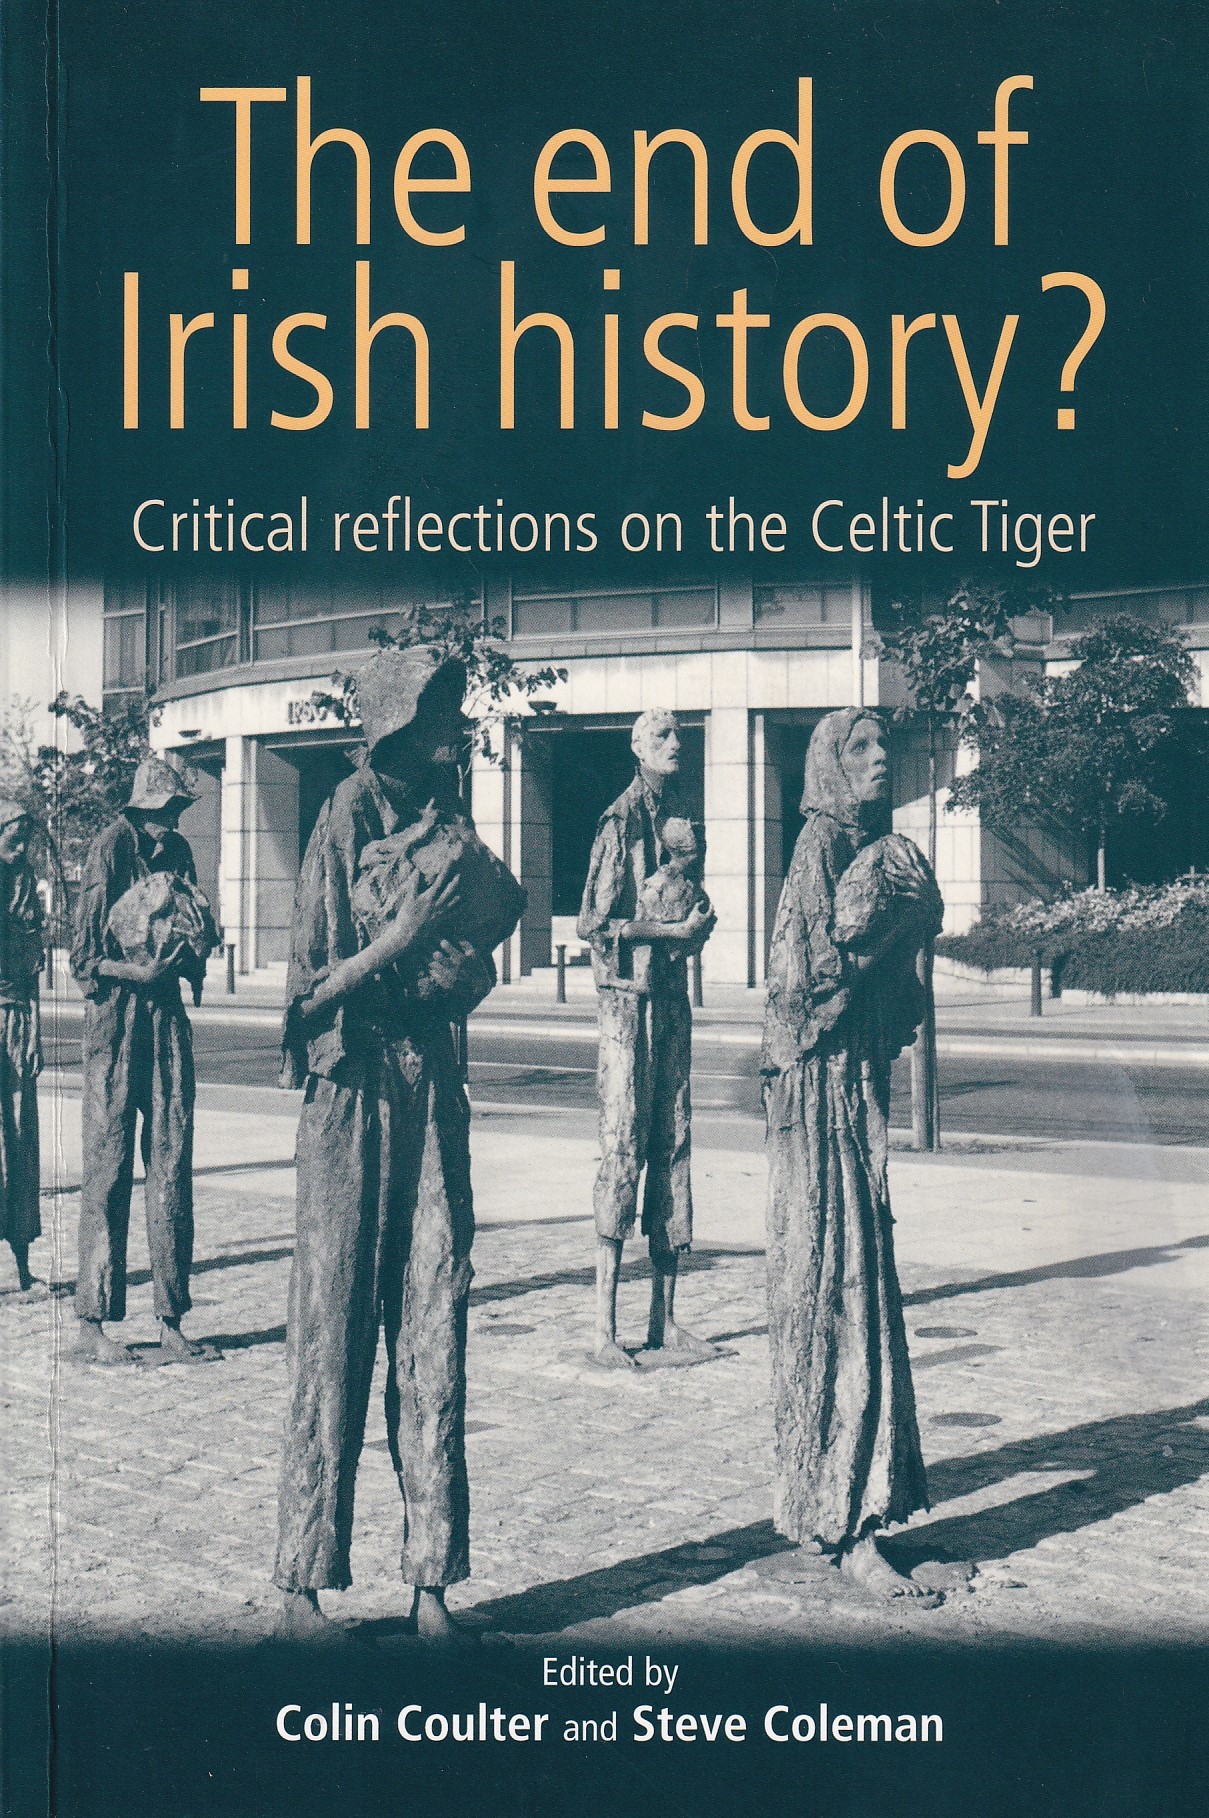 The End of Irish History? Critical Reflections on the Celtic Tiger | Colin Coulter & Steve Coleman (eds.) | Charlie Byrne's